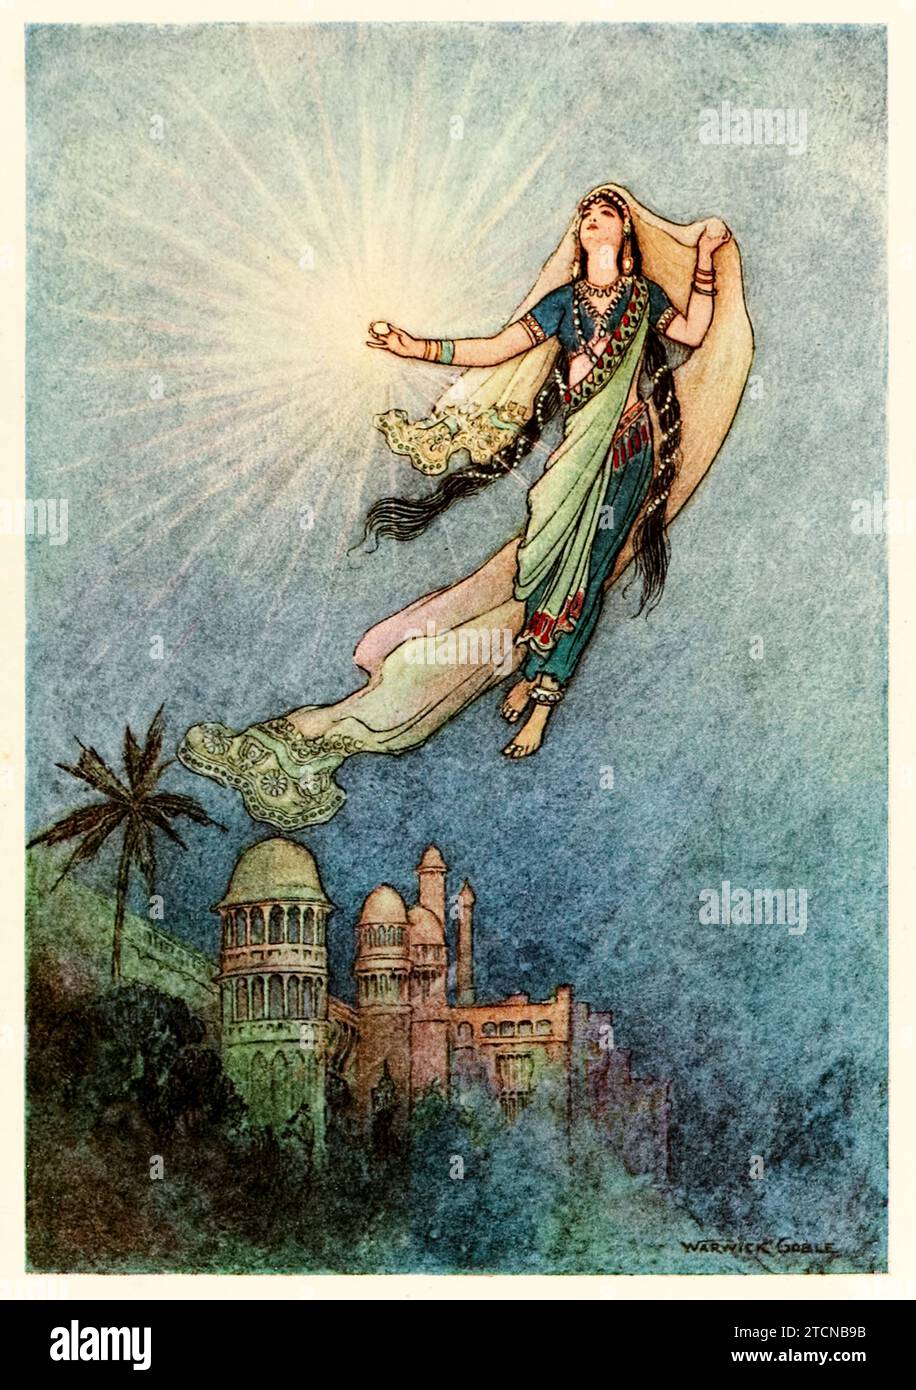 ‘She took up the jewel in her hand, left the place, and successfully reached the upper world’ from ‘Folk-tales of Bengal’ by Lal Behari Day (1824-1882), illustration by Warwick Goble (1862-1972). Photograph from a 1912 edition. Credit: Private Collection / AF Fotografie Stock Photo